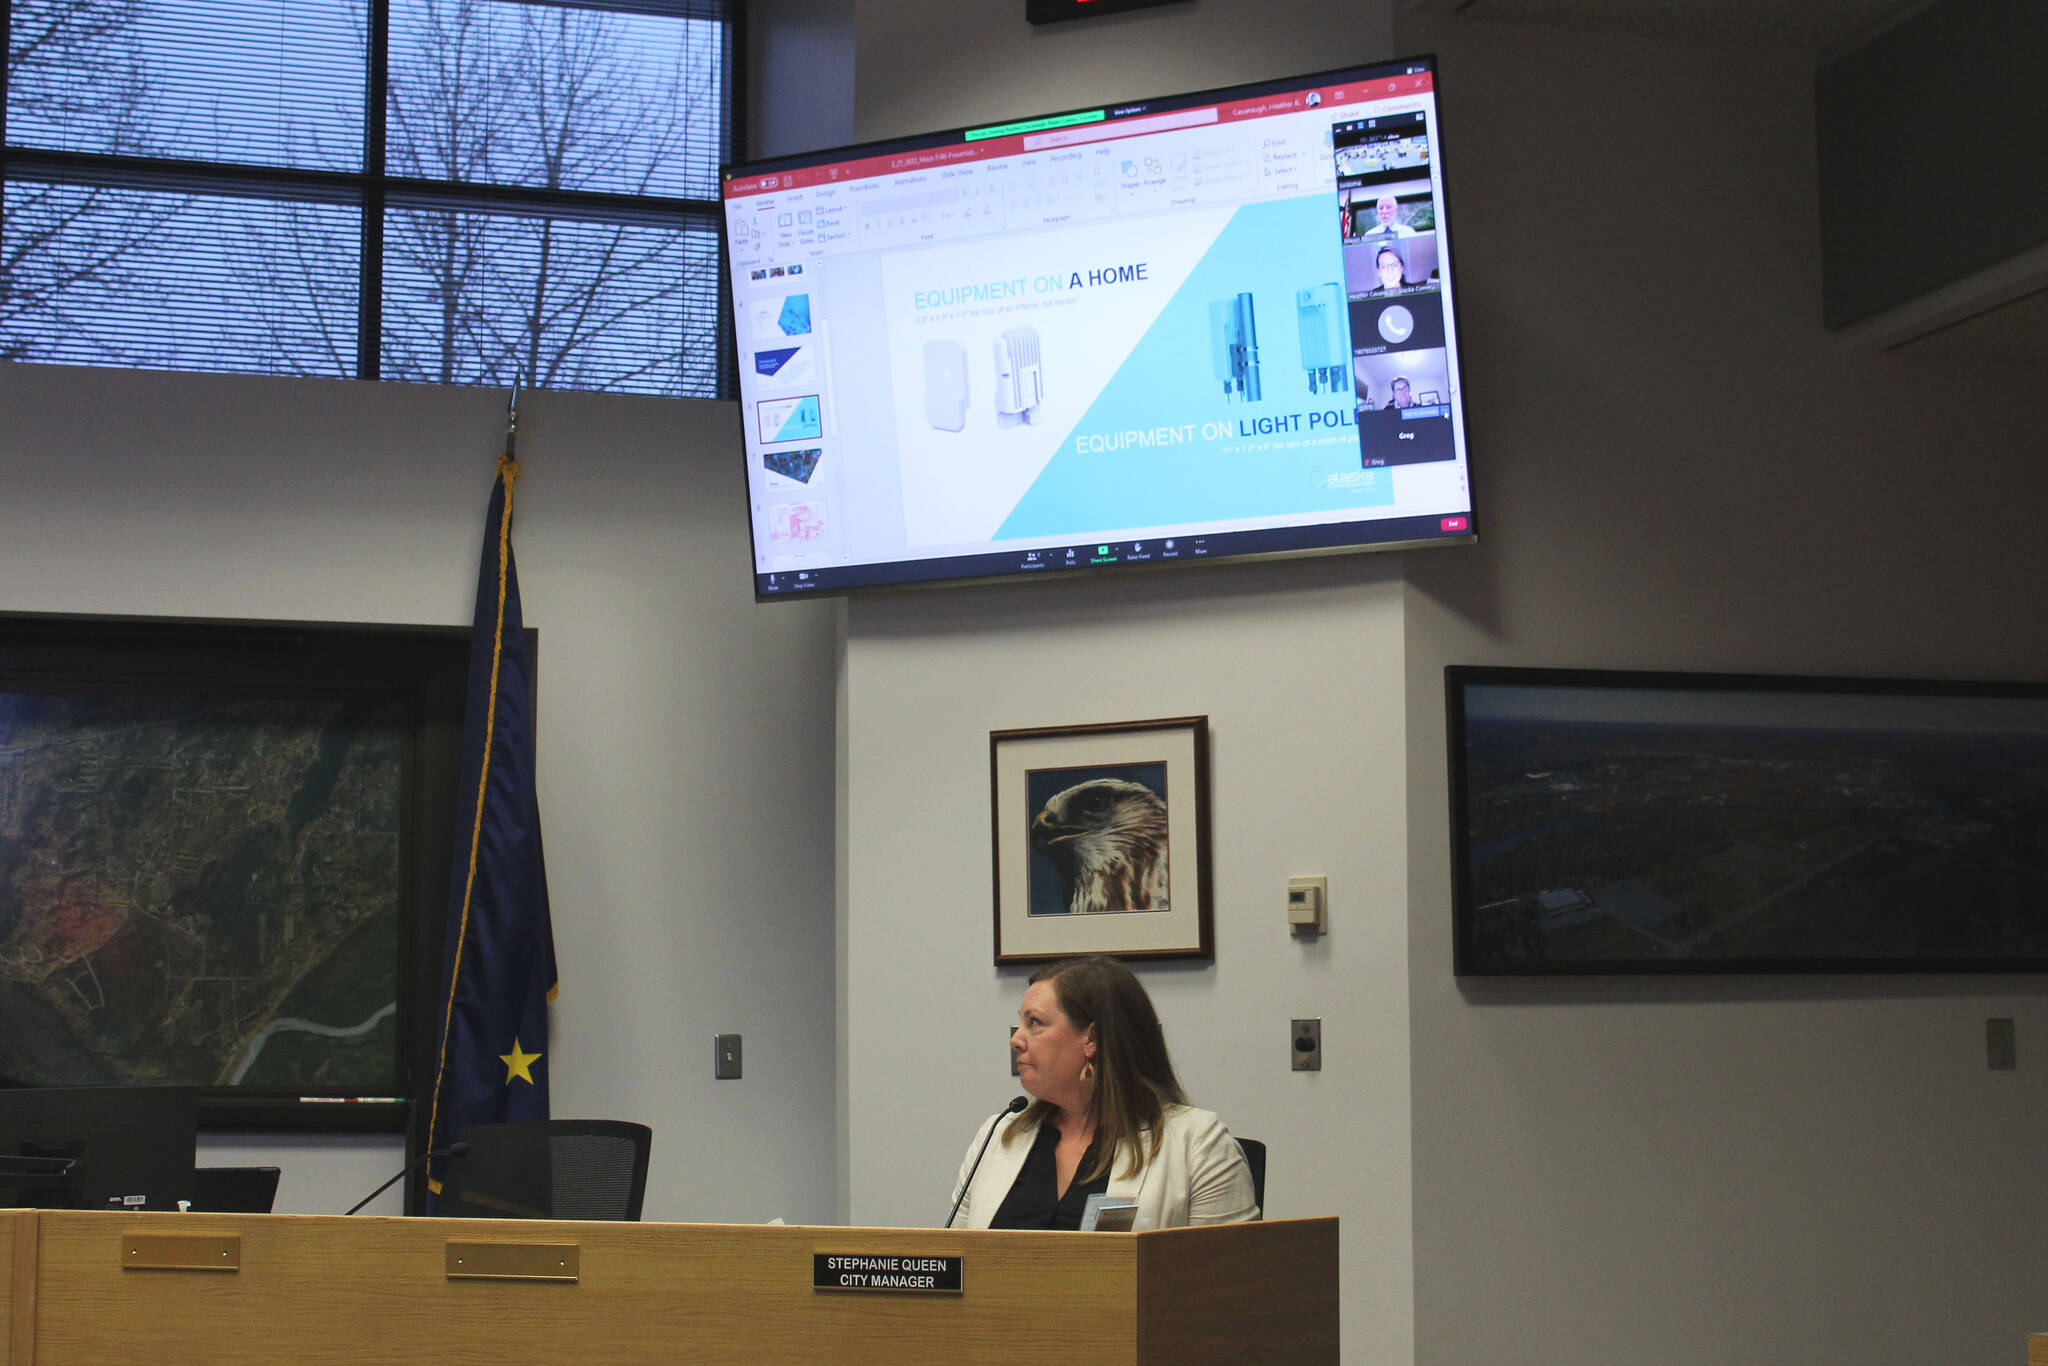 Soldotna City Manager Stephanie Queen listens to a presentation from Alaska Communications during a meeting of the Soldotna City Council on Wednesday, March 9, 2022 in Soldotna, Alaska. (Ashlyn O’Hara/Peninsula Clarion)